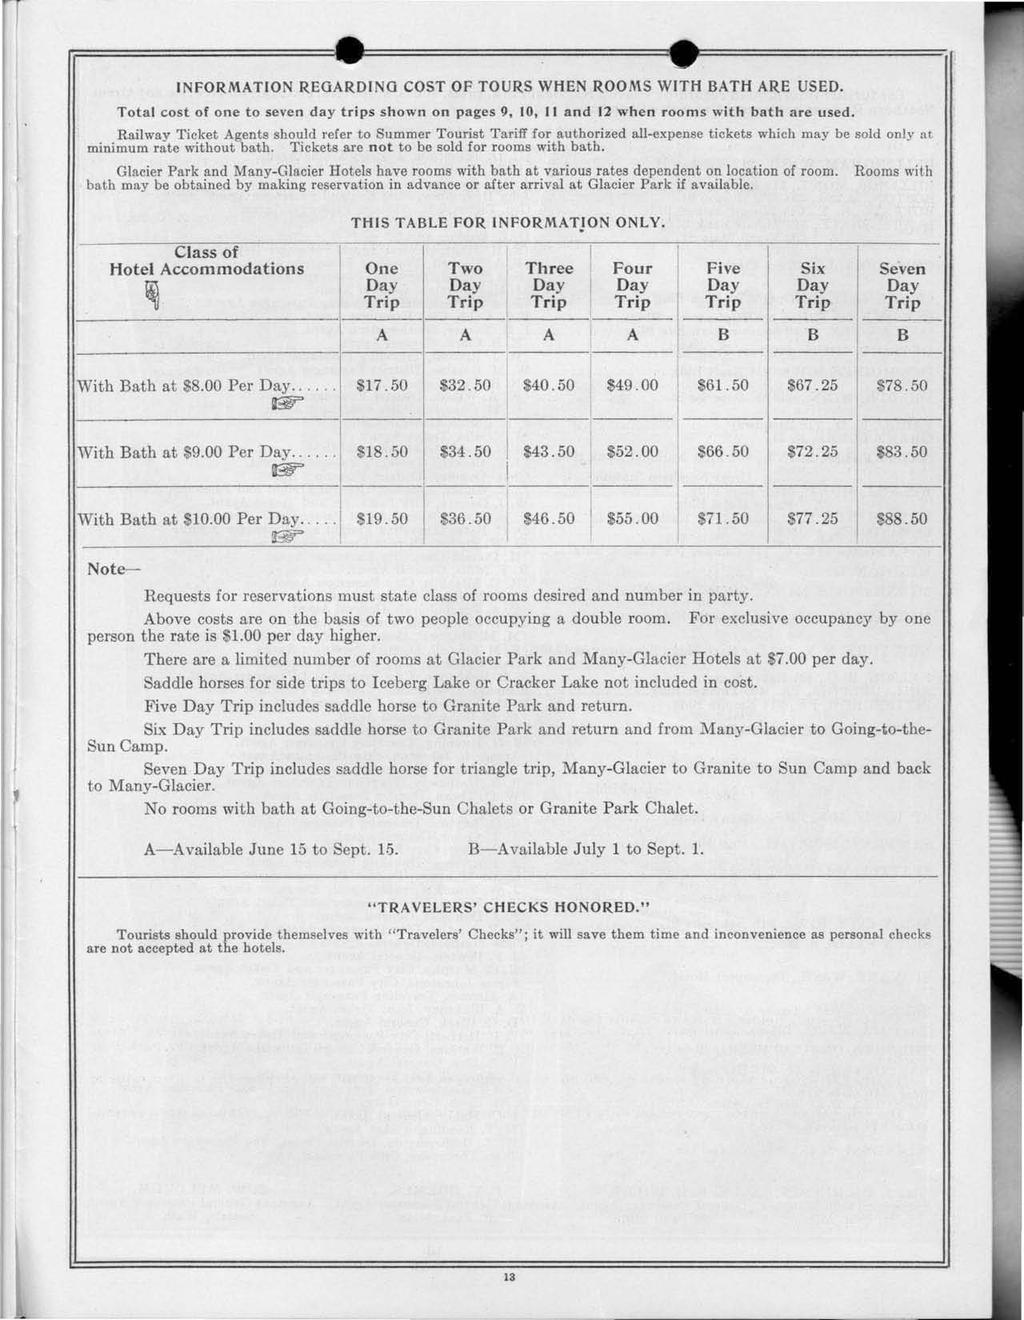 INFORMATION REGARDING COST OF TOURS WHEN ROOMS WITH BATH AR.E USED. Total cost of one to seven day trips shown on pages 9, 0, II and 2 when rooms with bath are used.